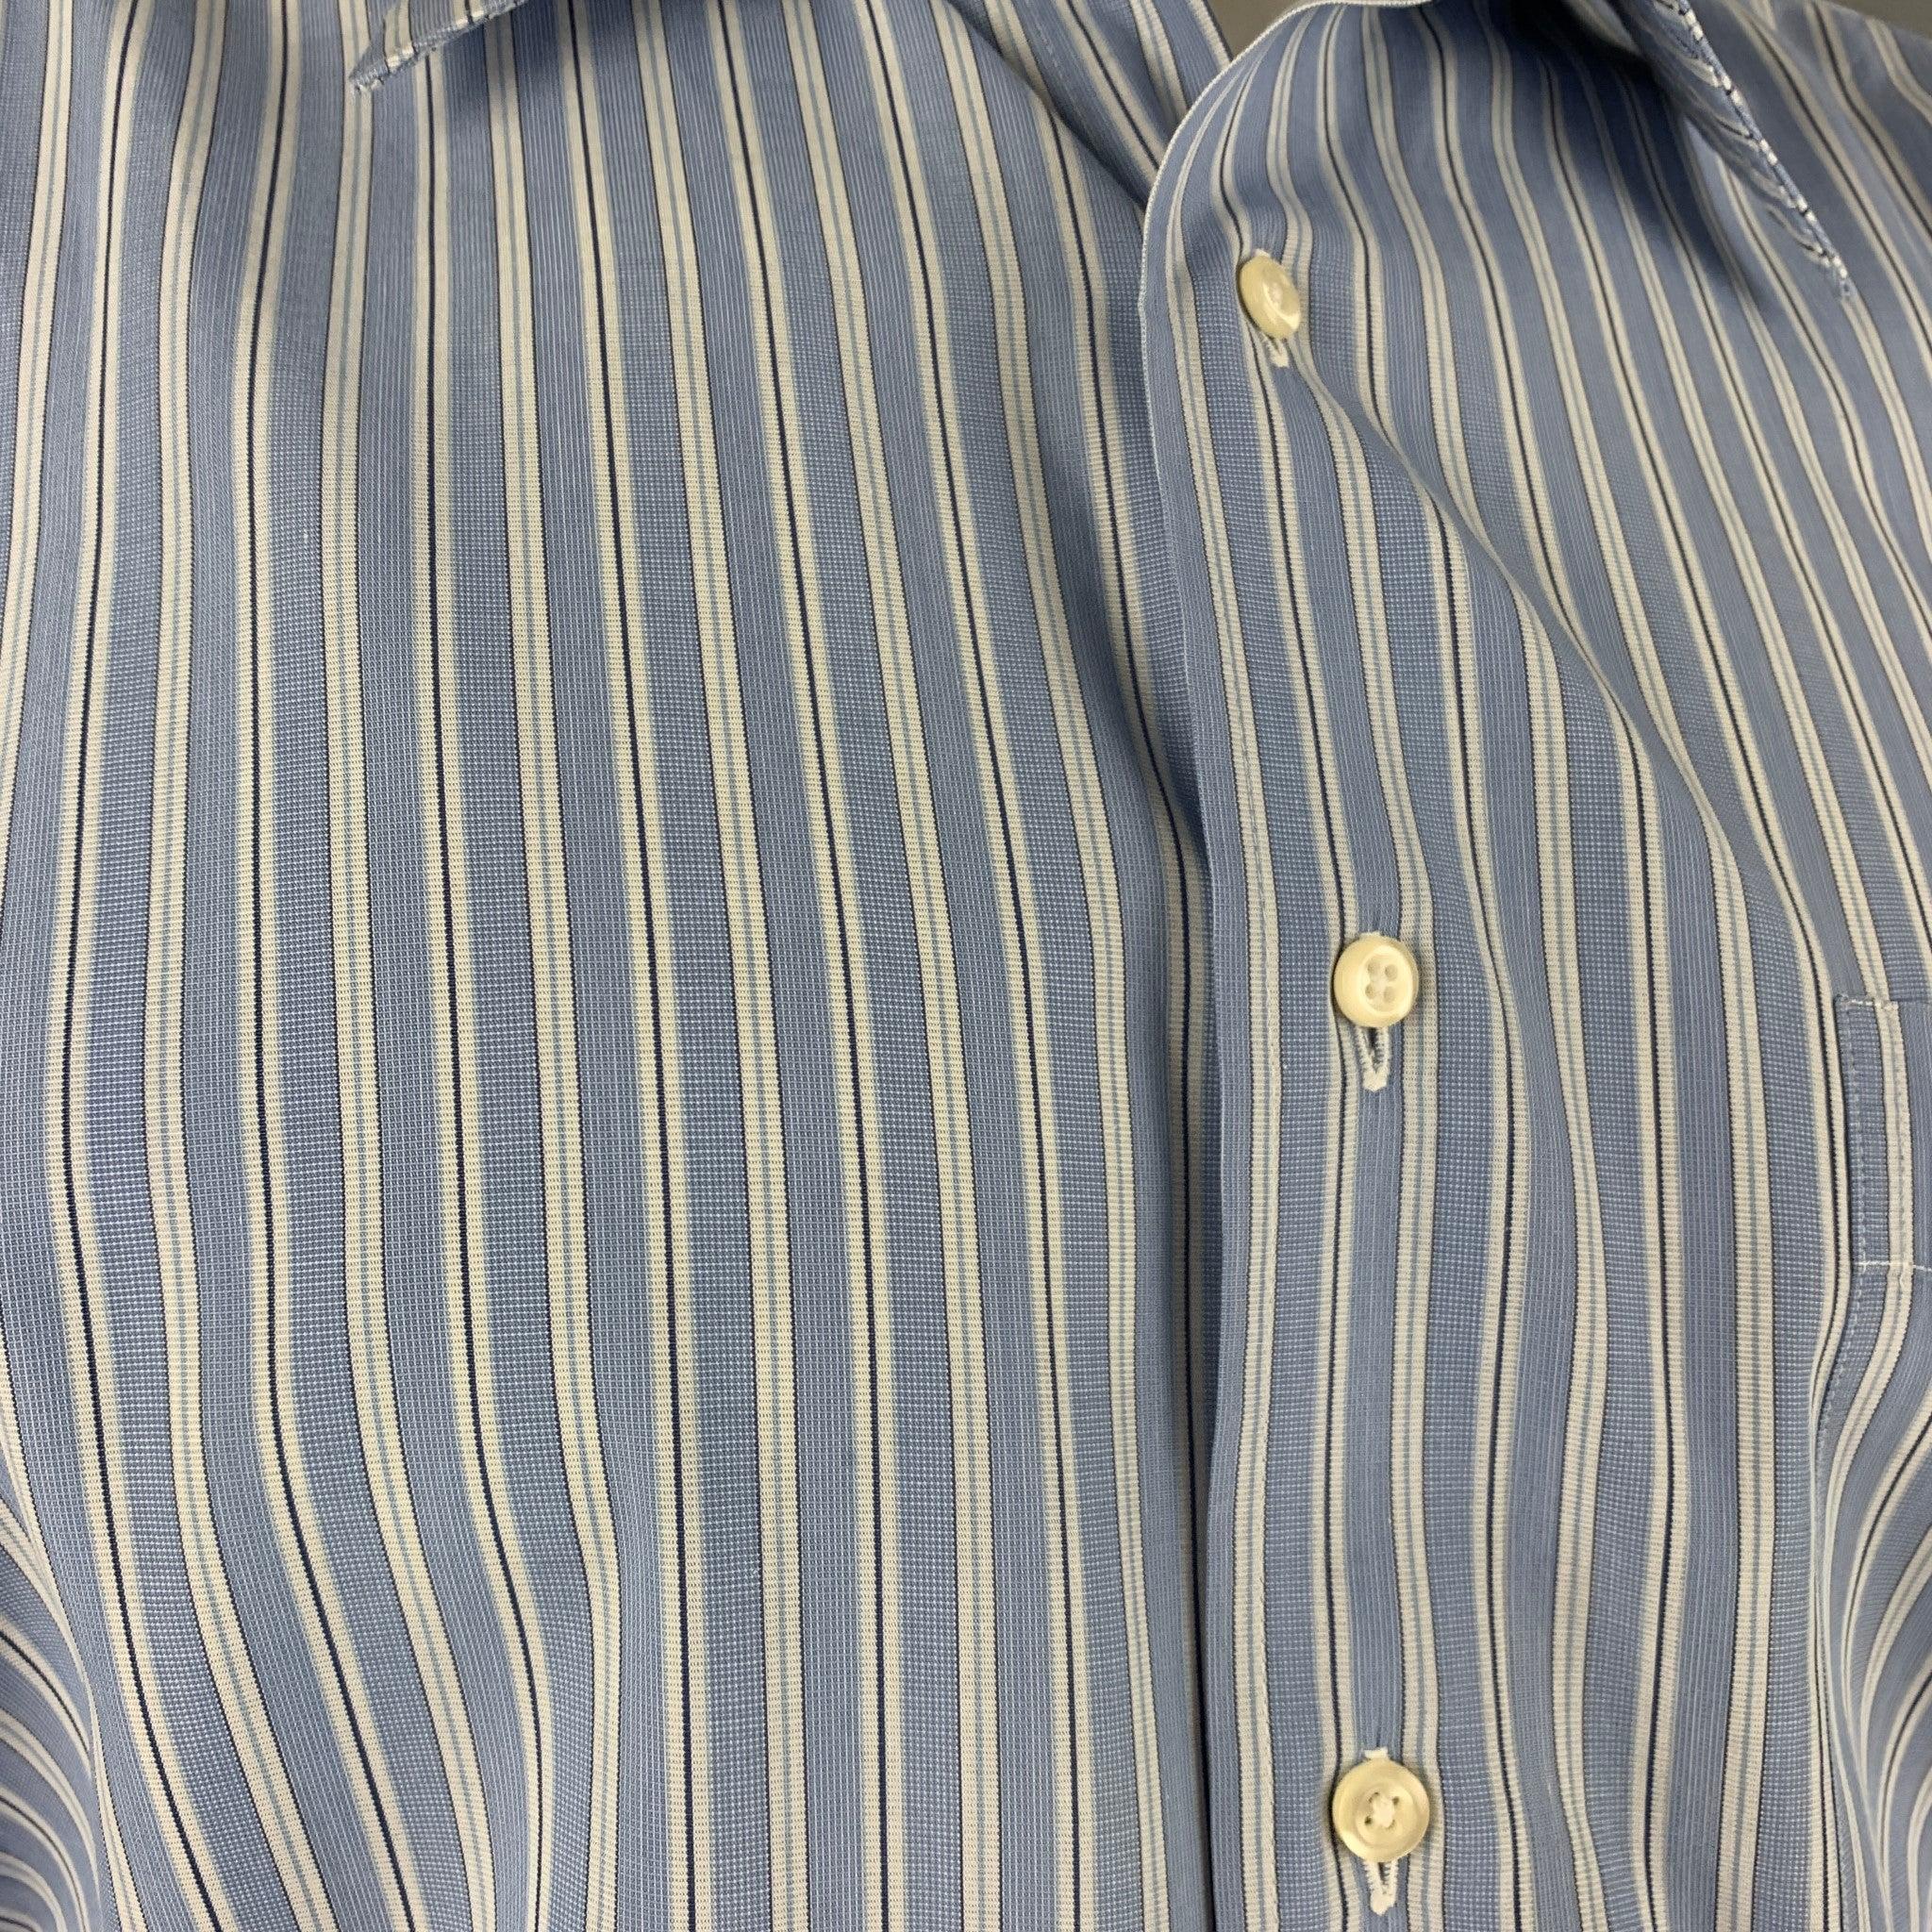 GITMAN BROS x ROCHESTER
long sleeve shirt in a blue and white cotton fabric, featuring a vertical striped pattern, oversized fit, one patch pocket, and a button closure.Very Good Pre-Owned Condition. Minor signs of wear. 

Marked:   17-36